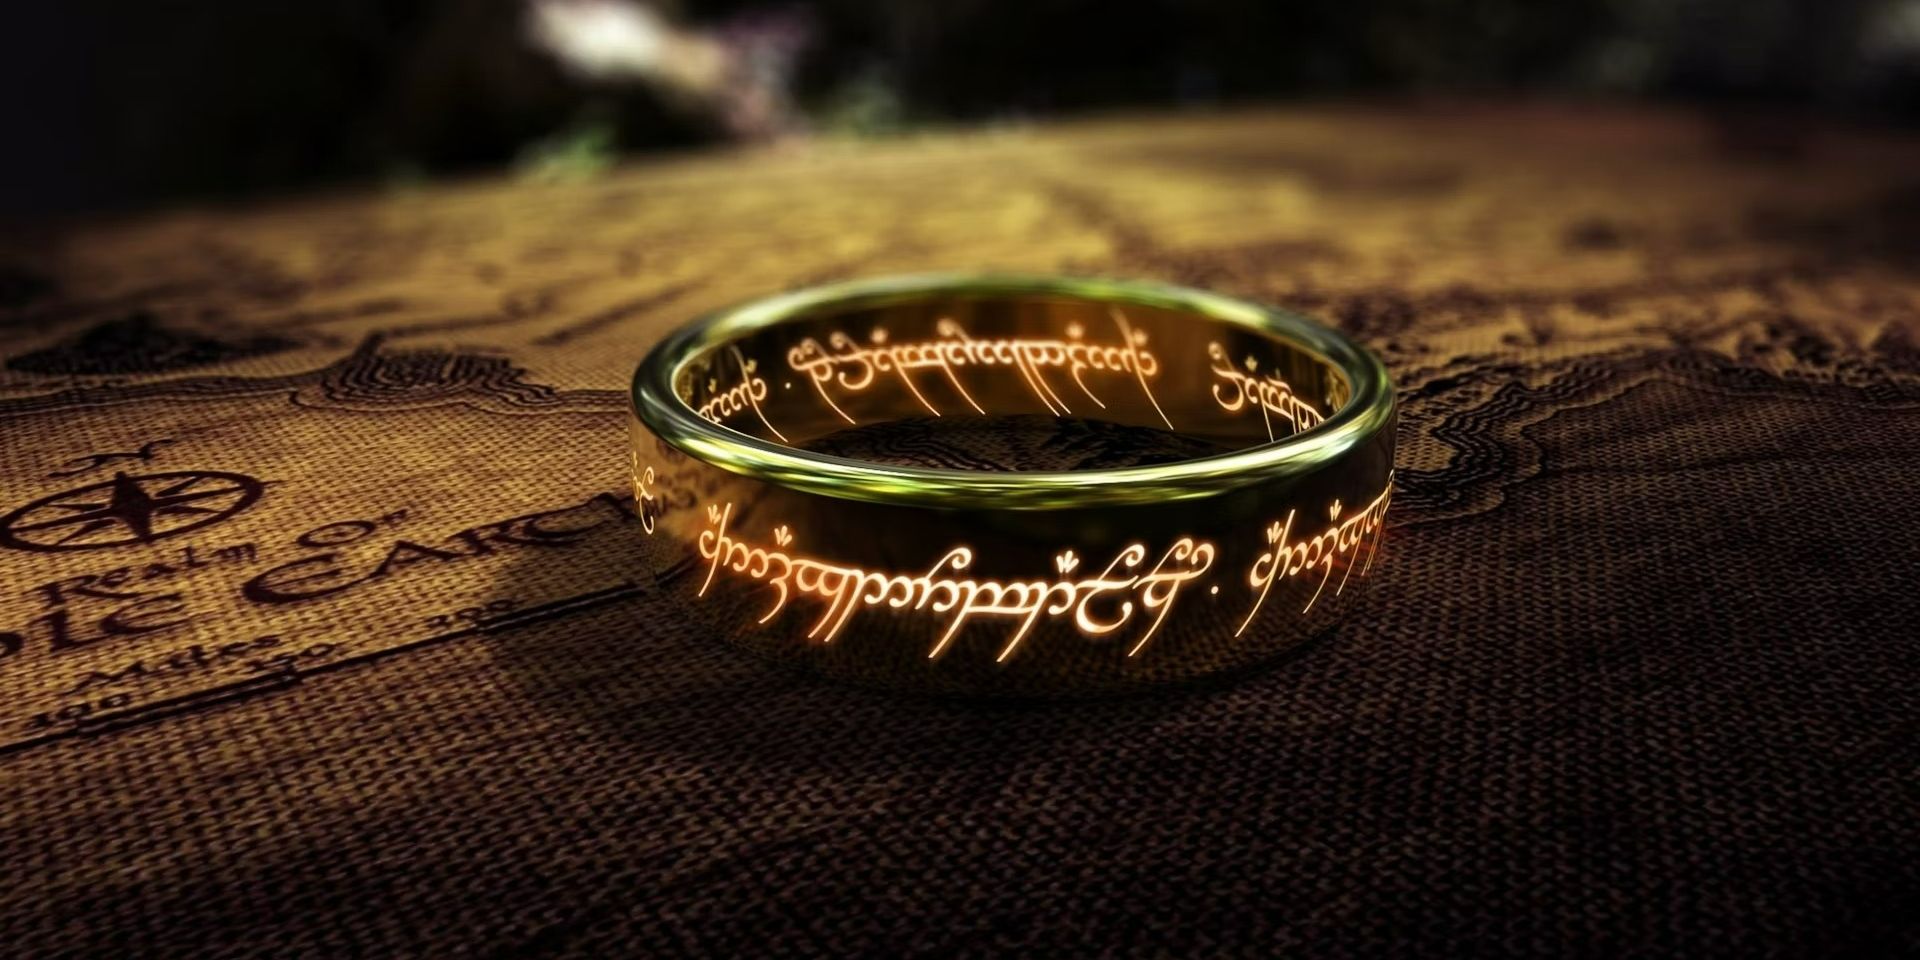 The Lord of the Rings One Ring